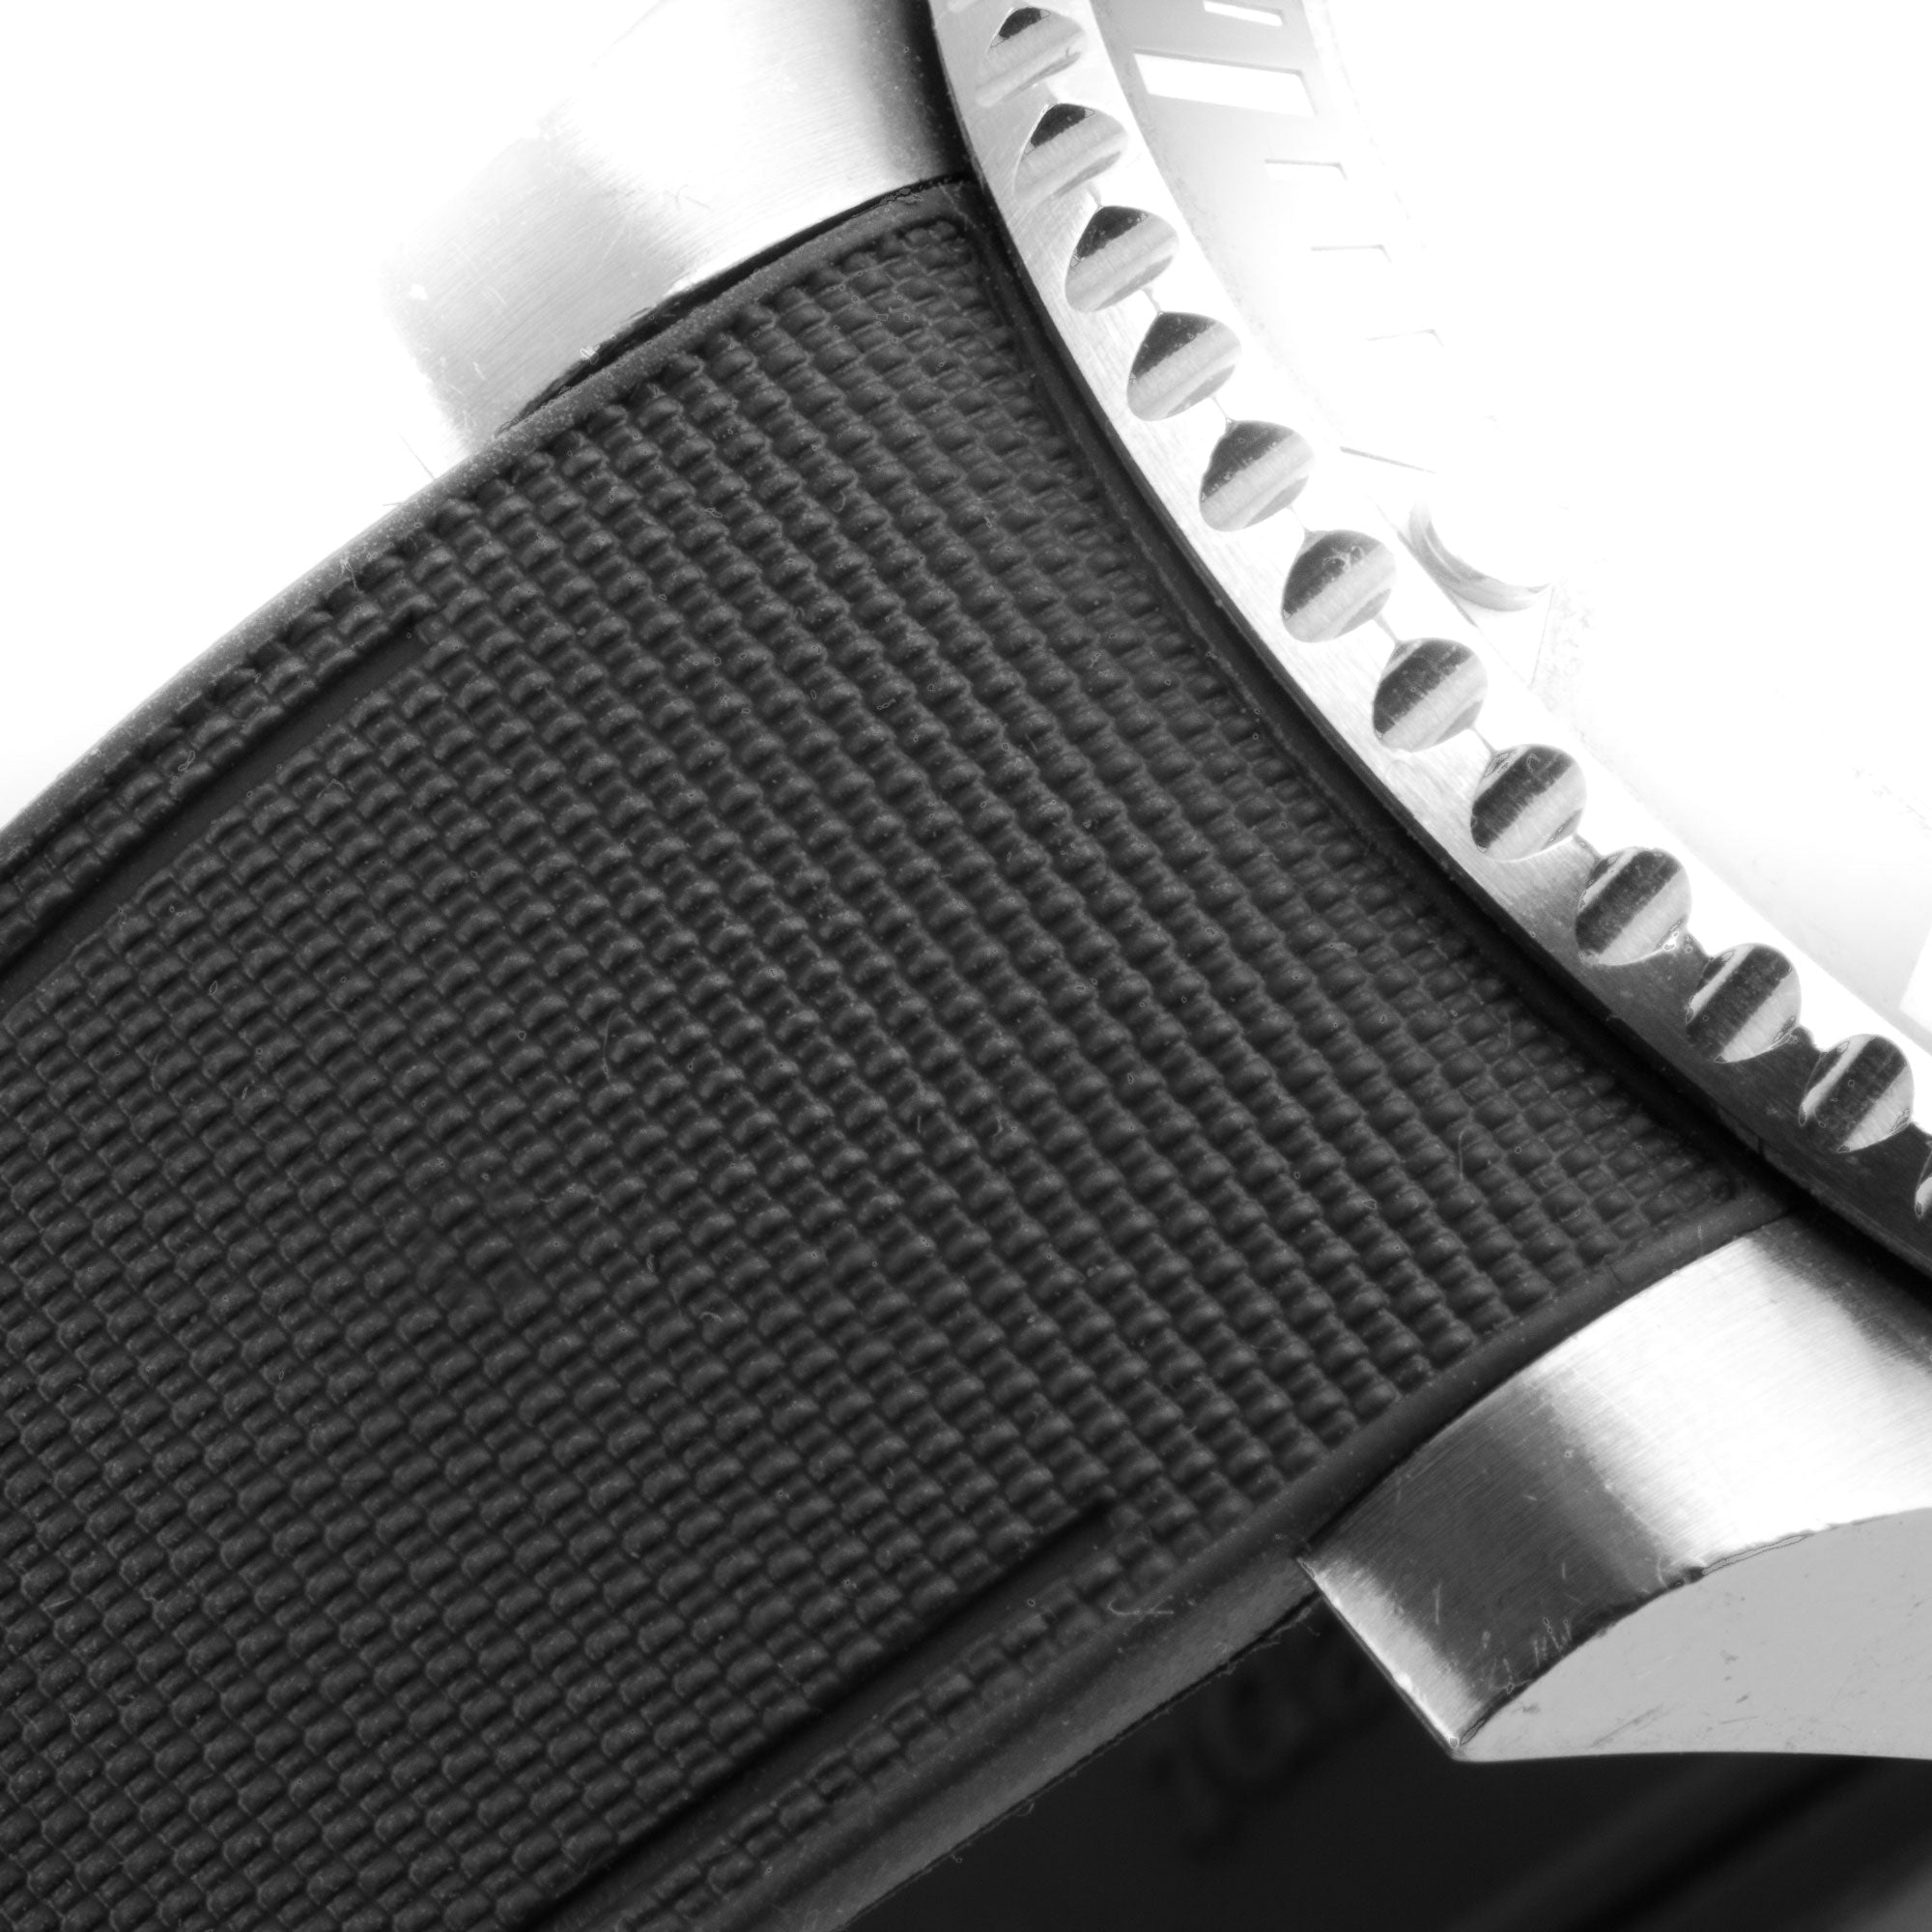 ​Rolex - R Strap Premium – Cordura pattern rubber watch band for Oyster Perpetual 39mm